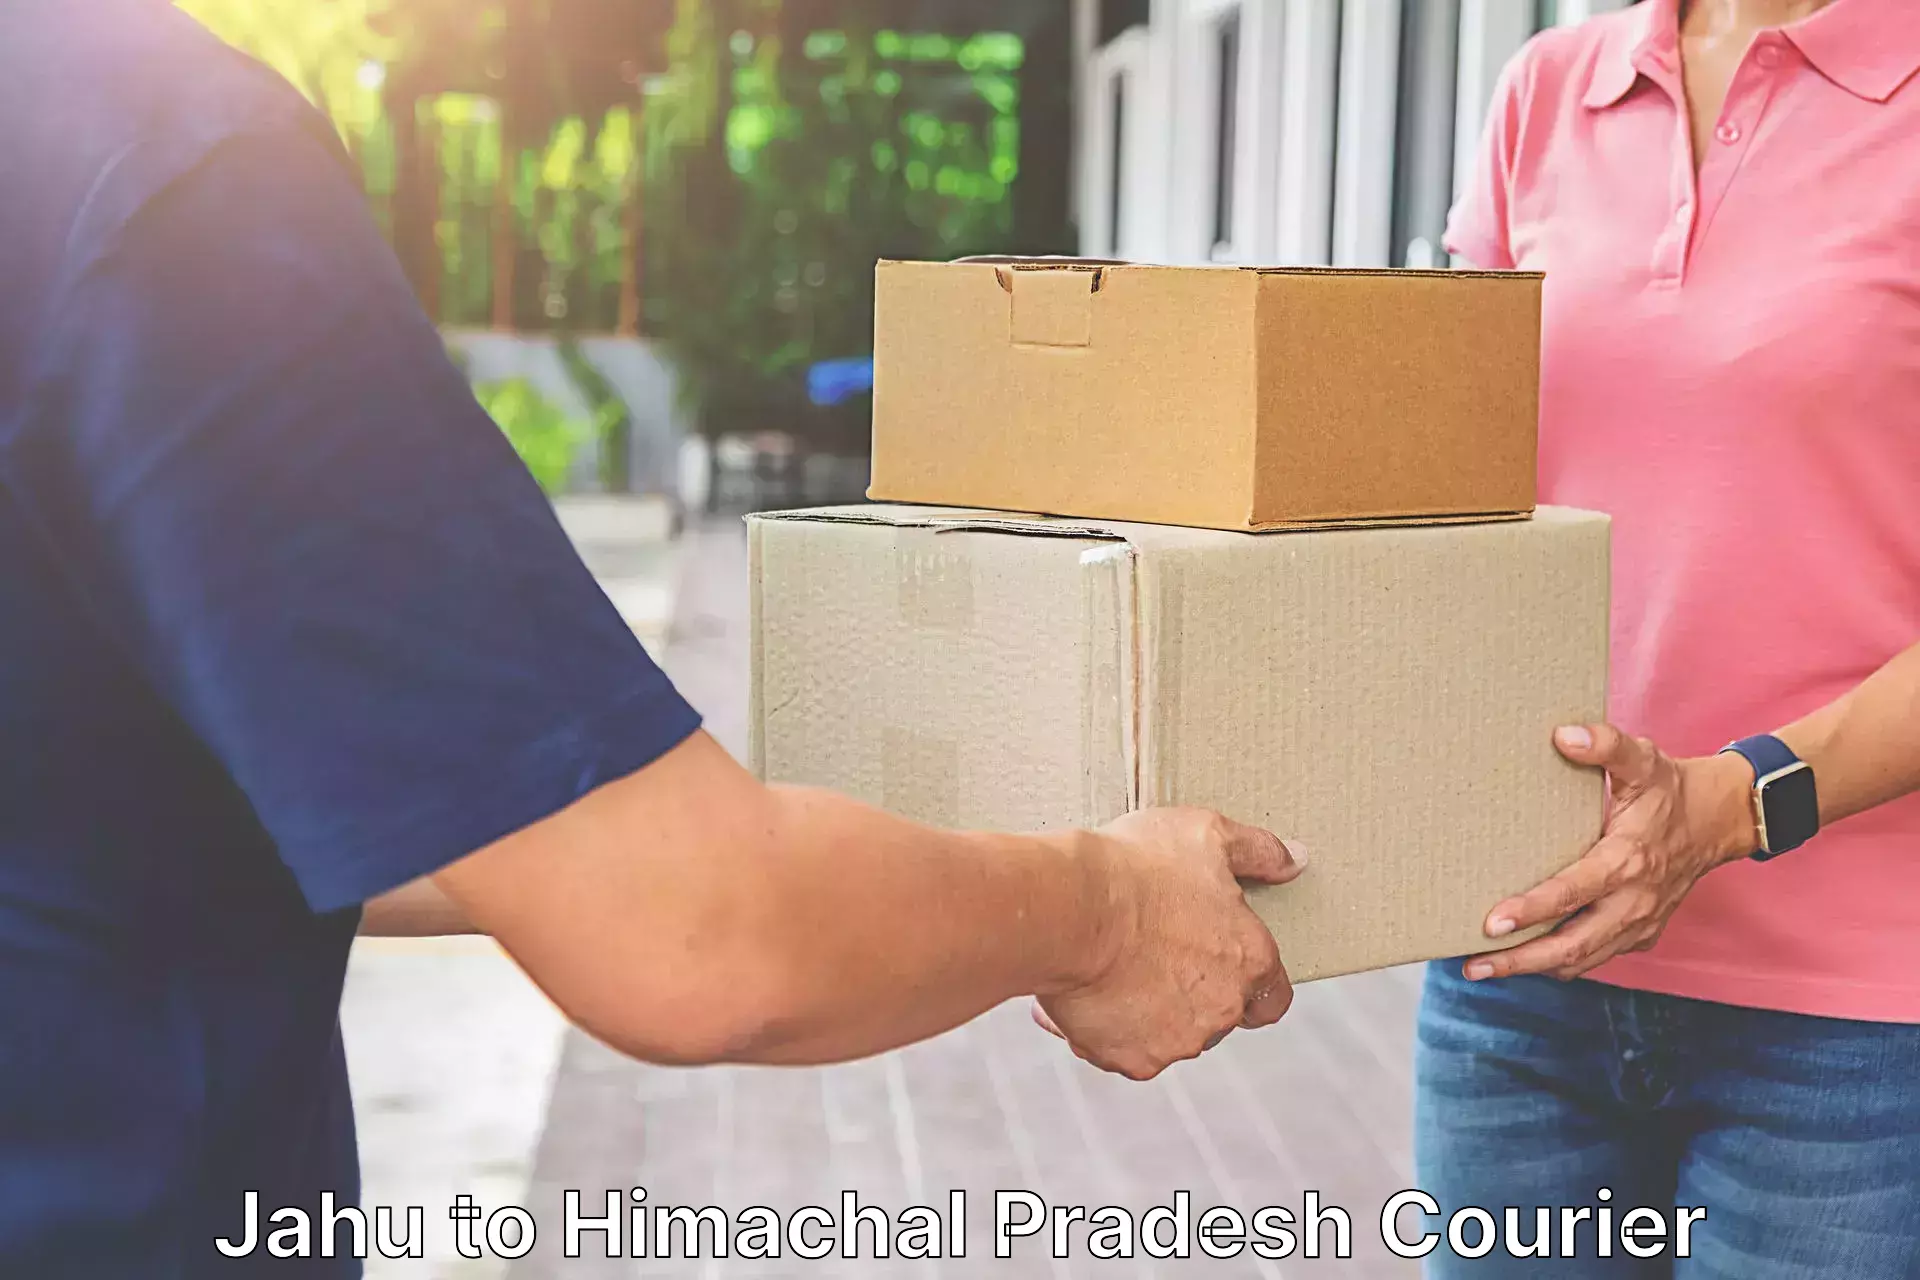 Cash on delivery service Jahu to Himachal Pradesh